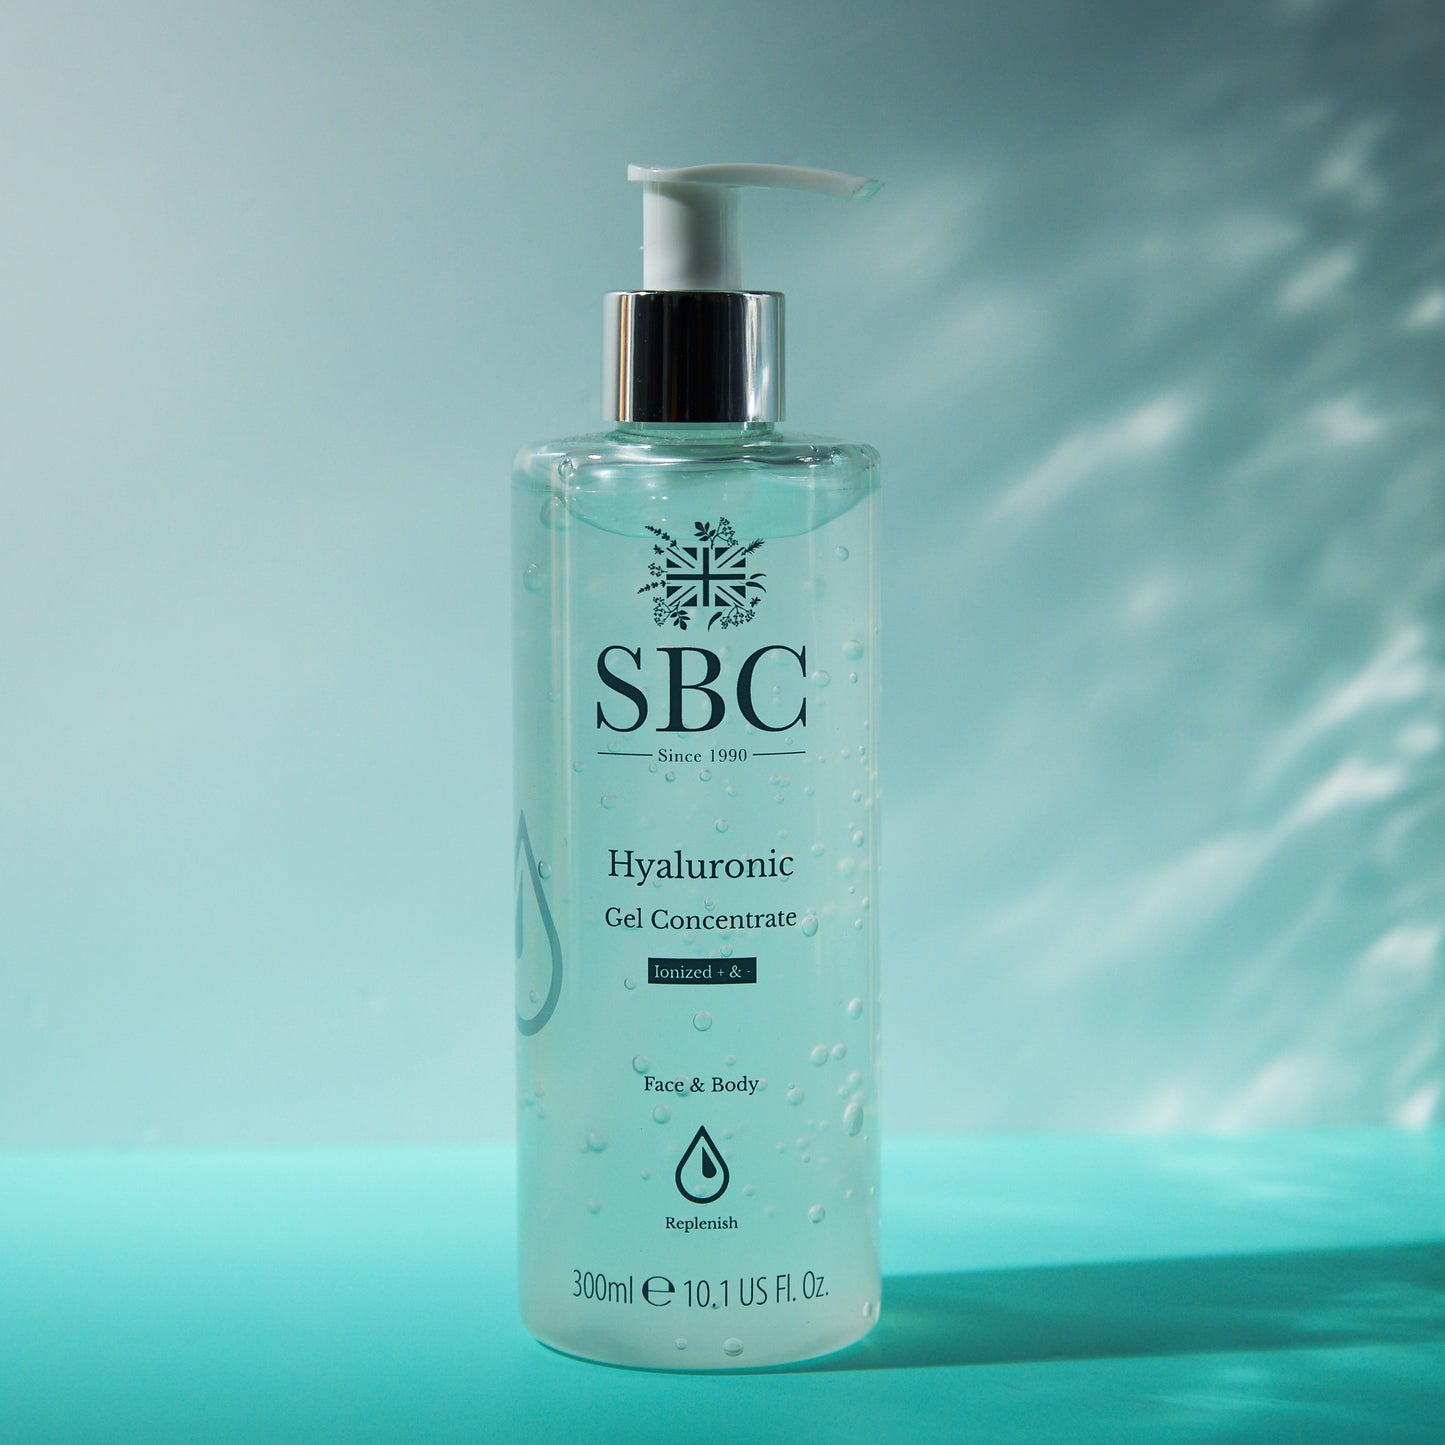 300ml SBC Skincare's Hyaluronic Gel Concentrate on a blue surface with natural light